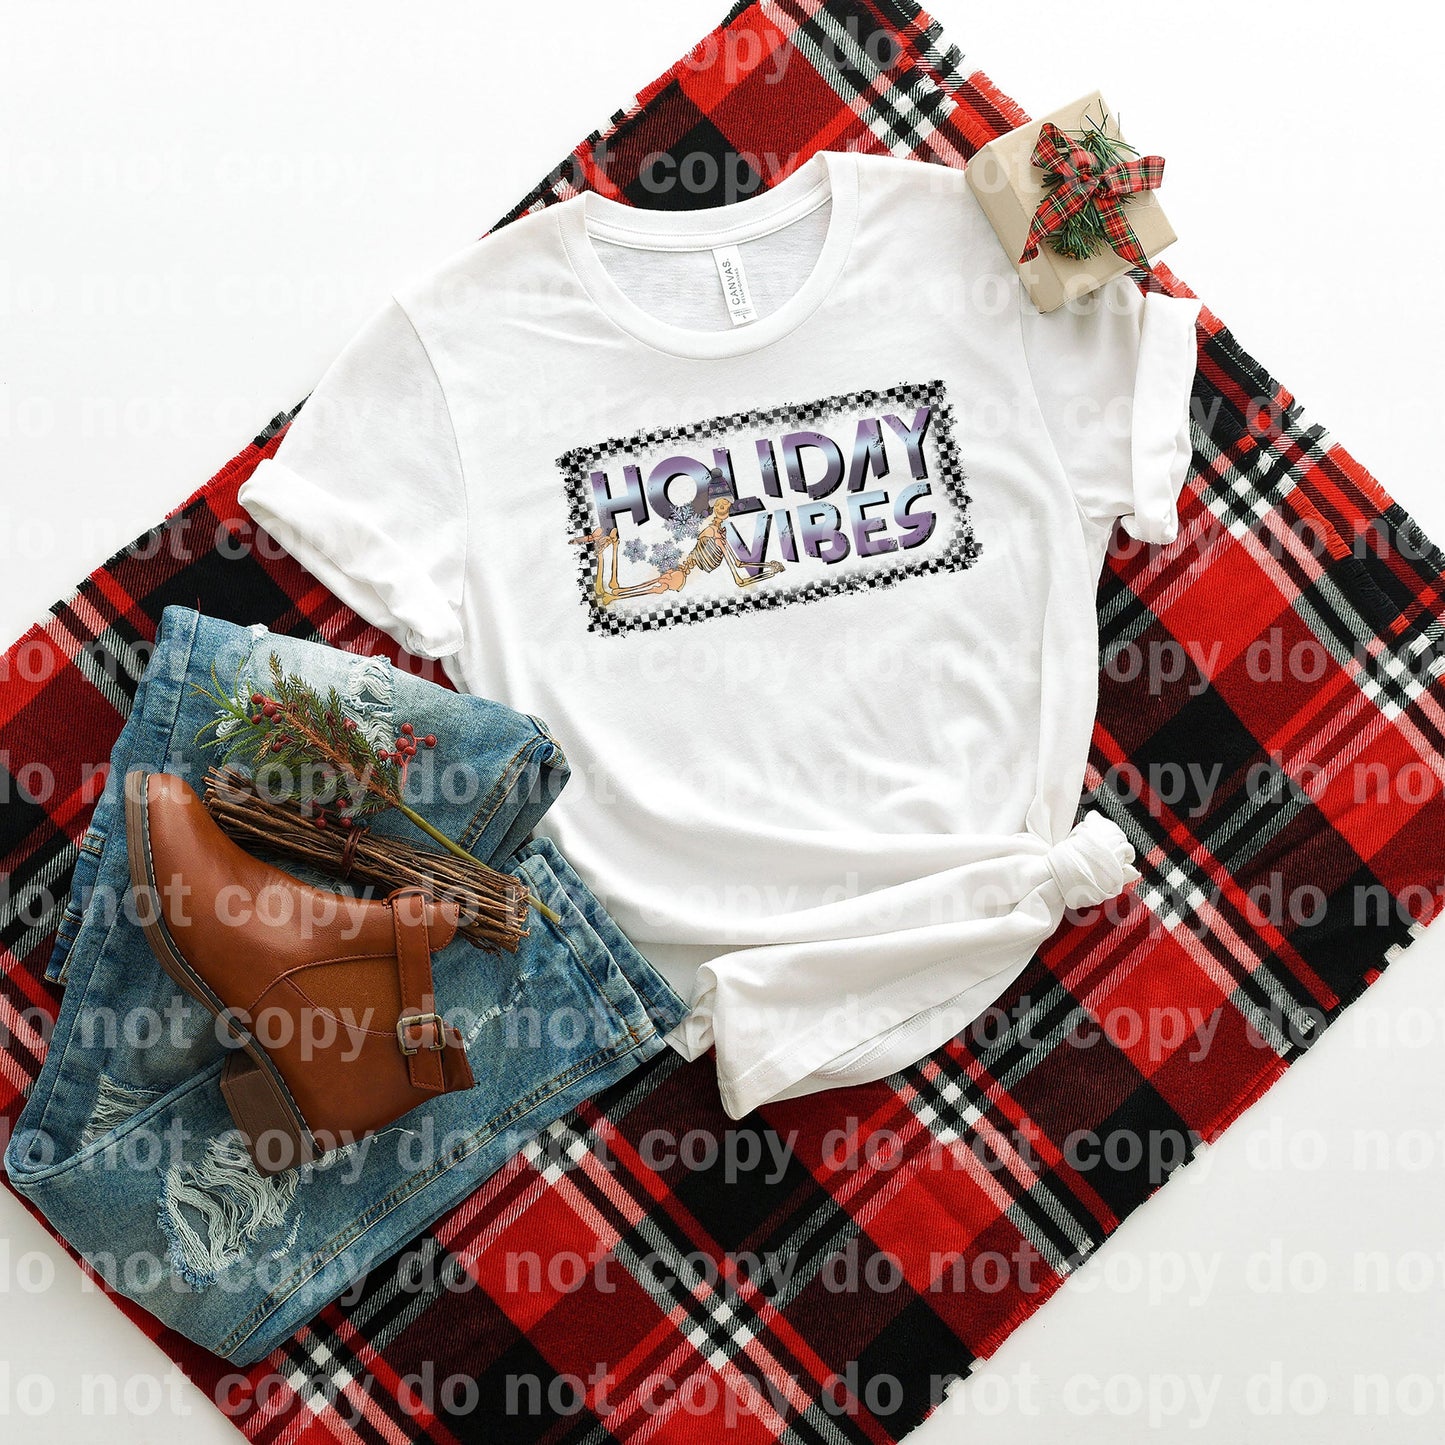 Holiday Vibes Dream Print or Sublimation Print